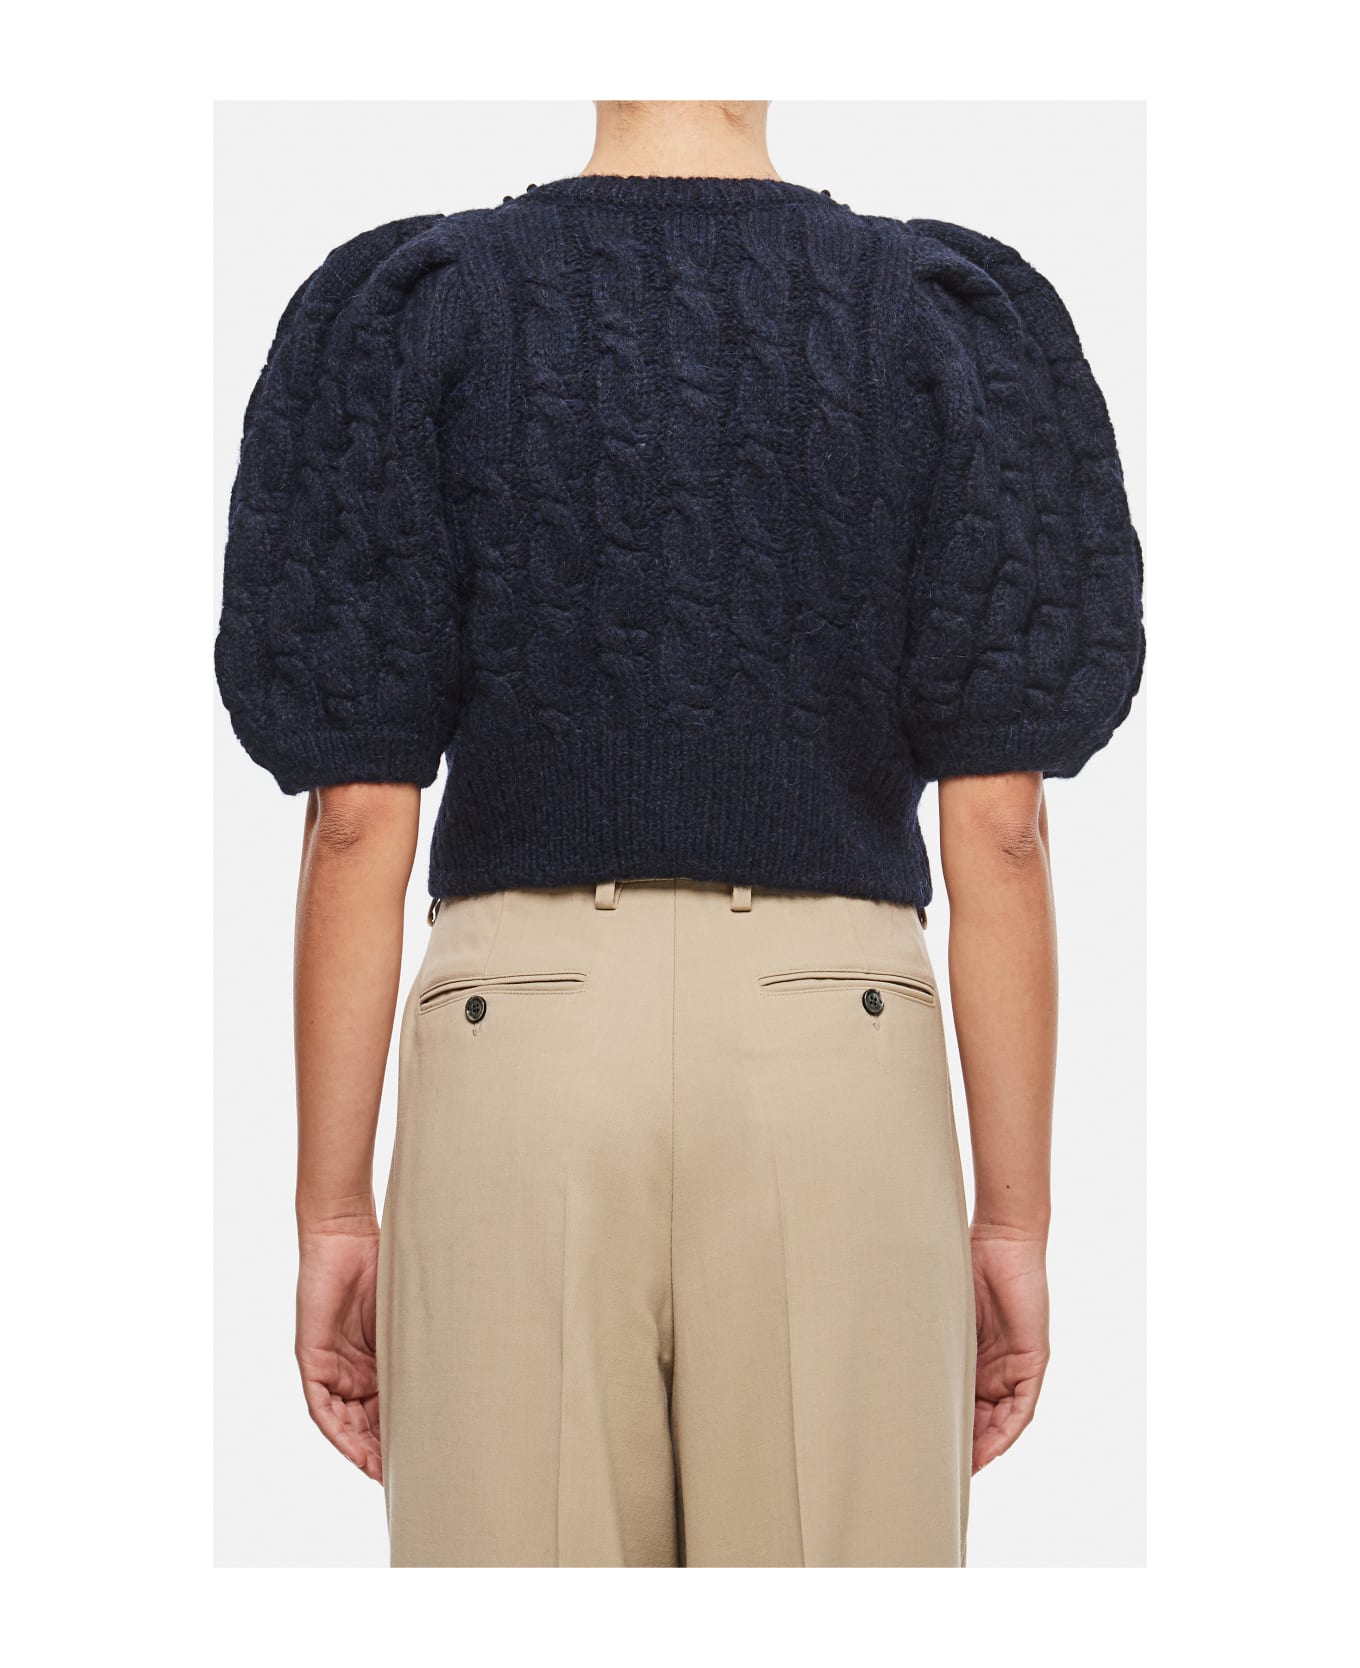 Simone Rocha Cropped Cable Puff Sleeve Cardigan - Blue